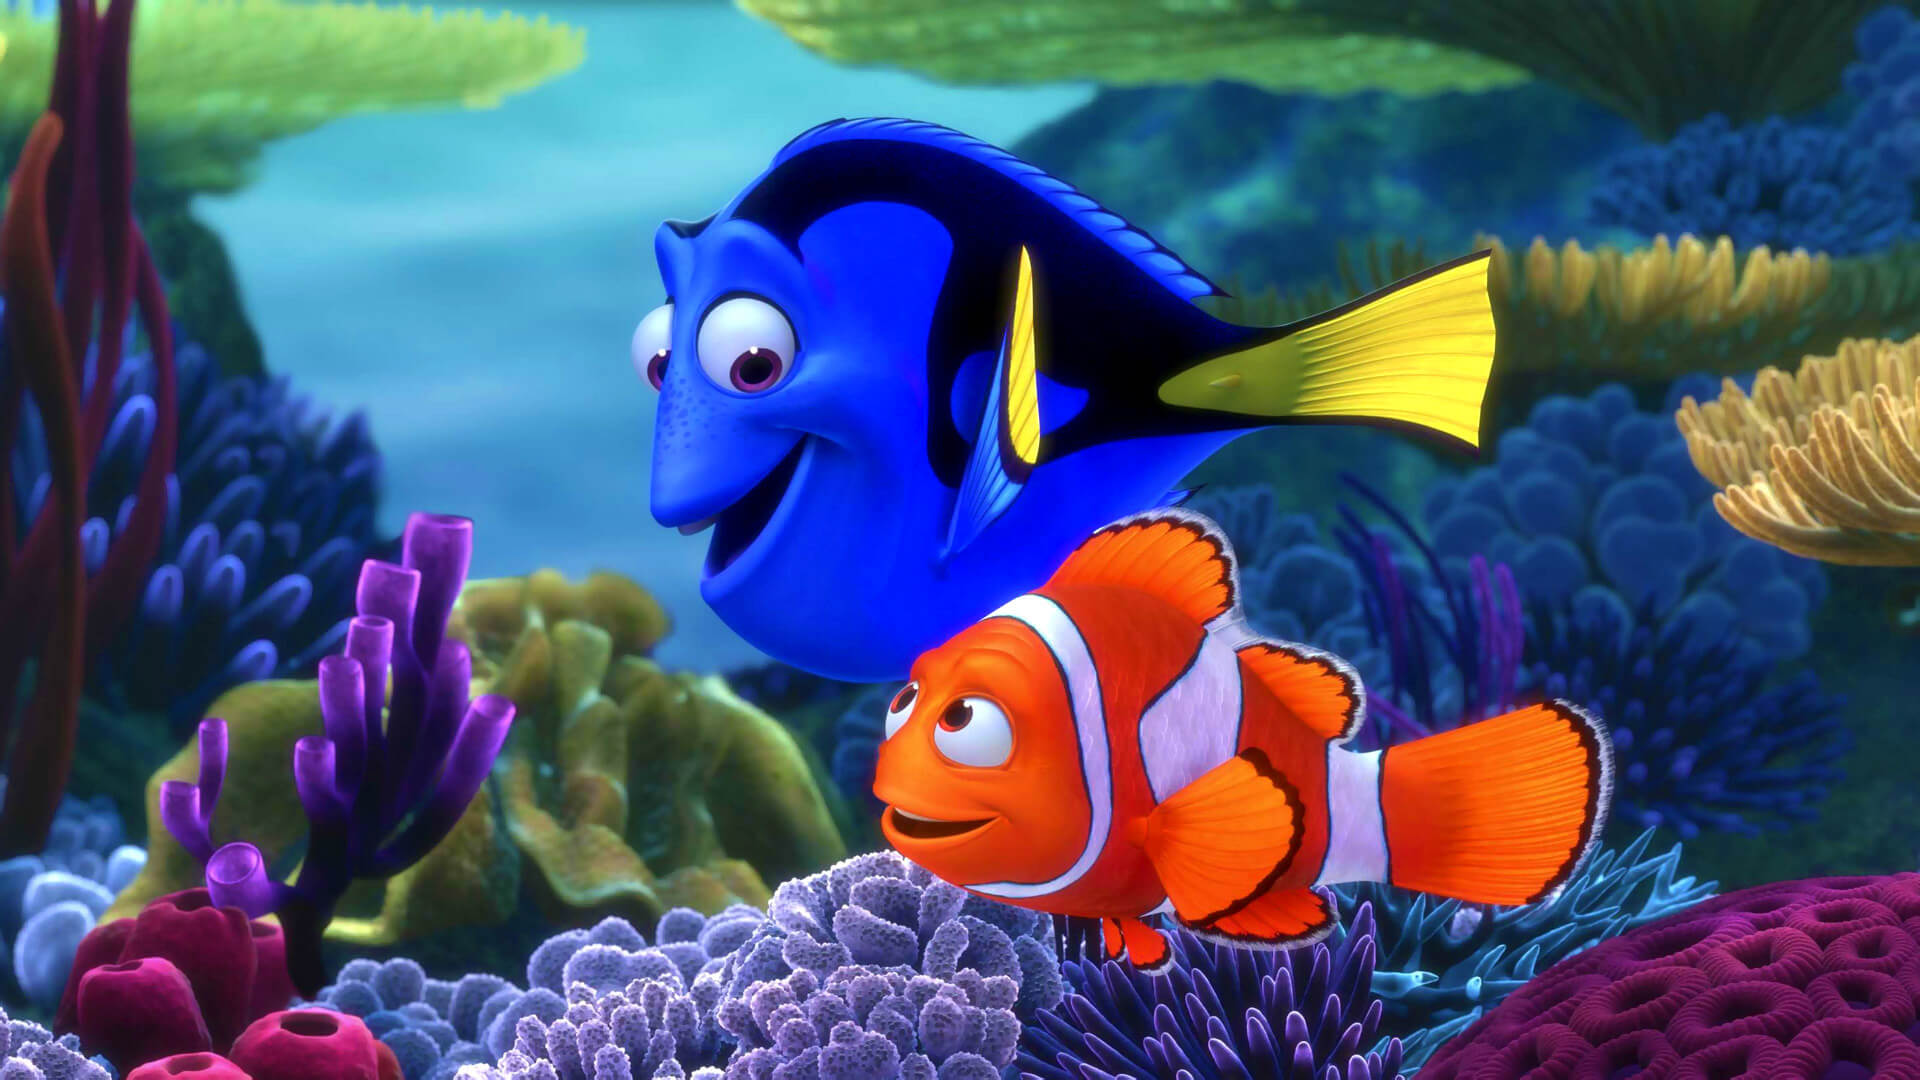 What is Anthropomorphism Finding Nemo Anthropomorphism Examples